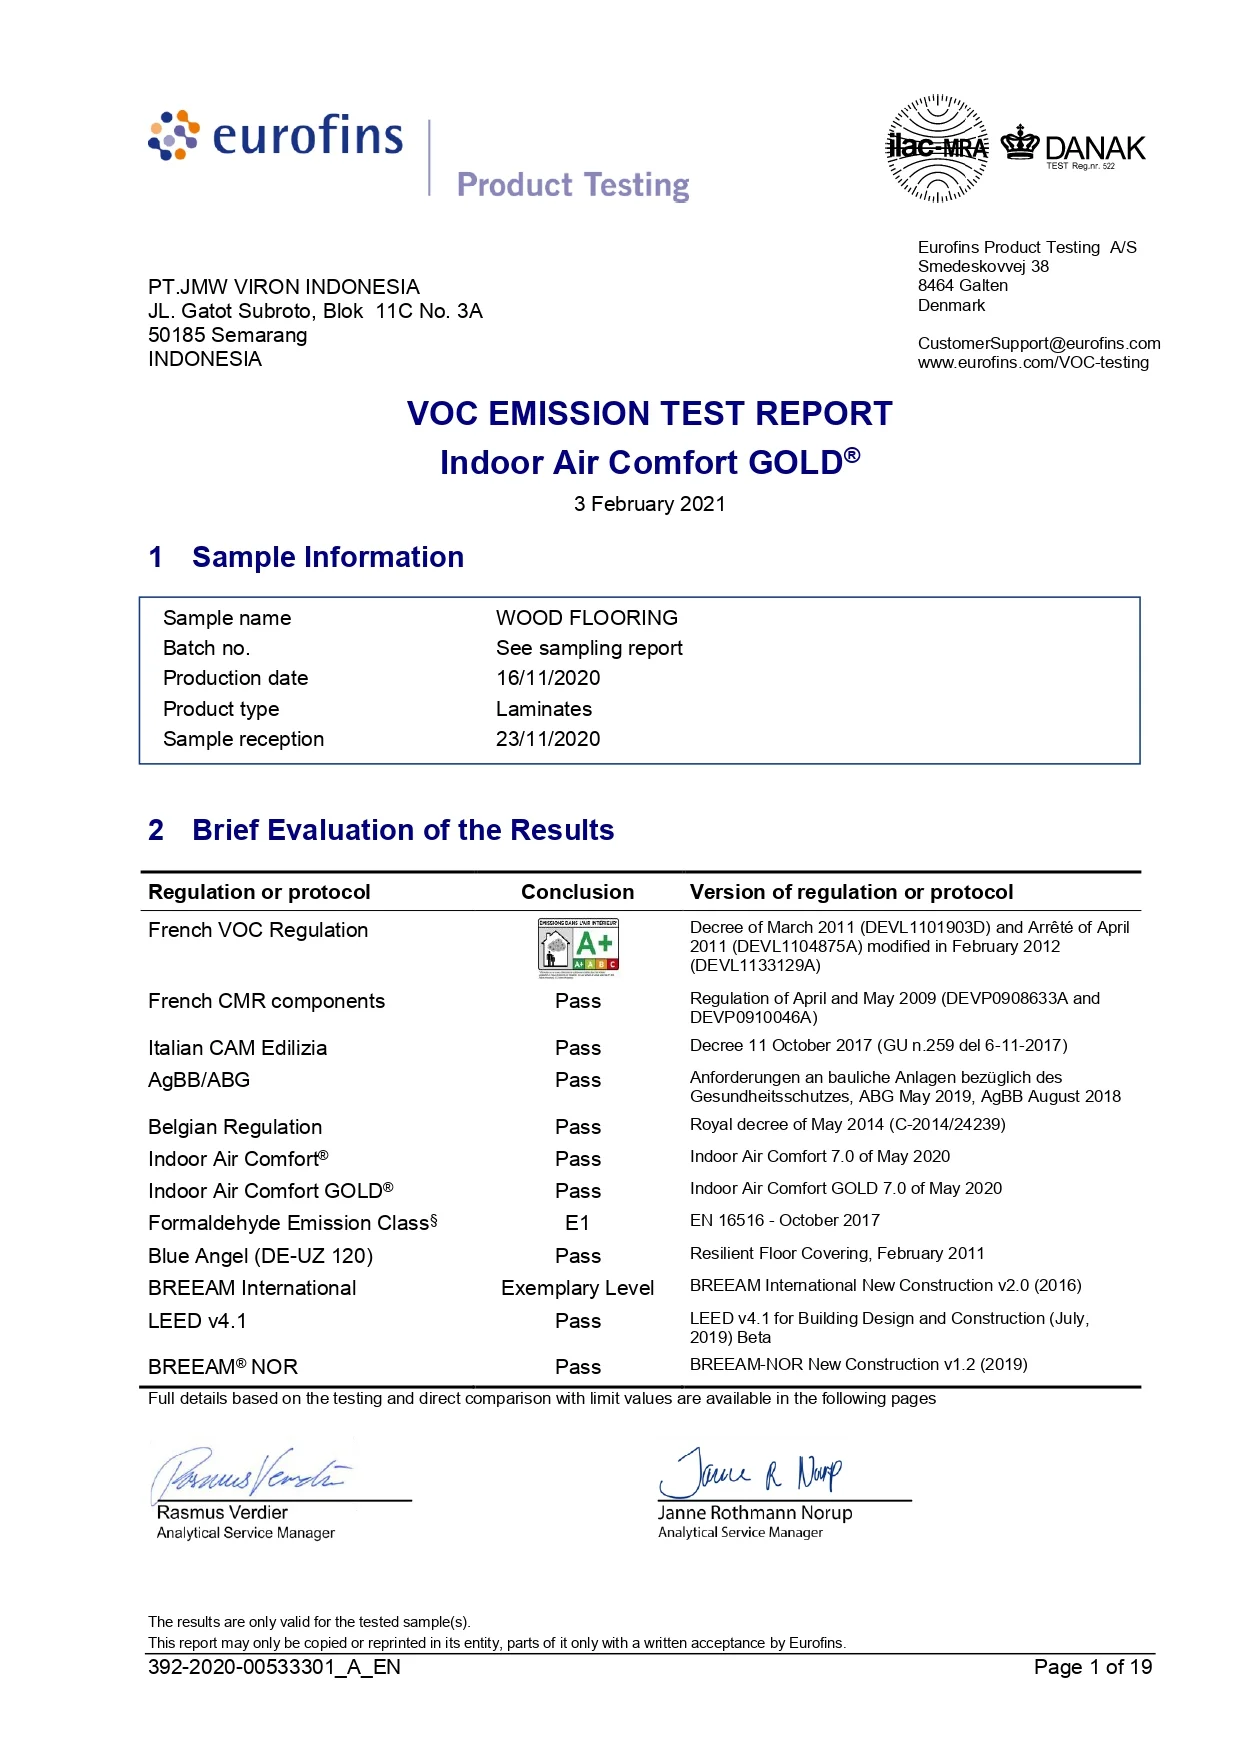 2021-02-04 CERTIFICATE VOC EMISSION TEST REPORT INDOOR AIR COMFORT GOLD_pages-to-jpg-0001